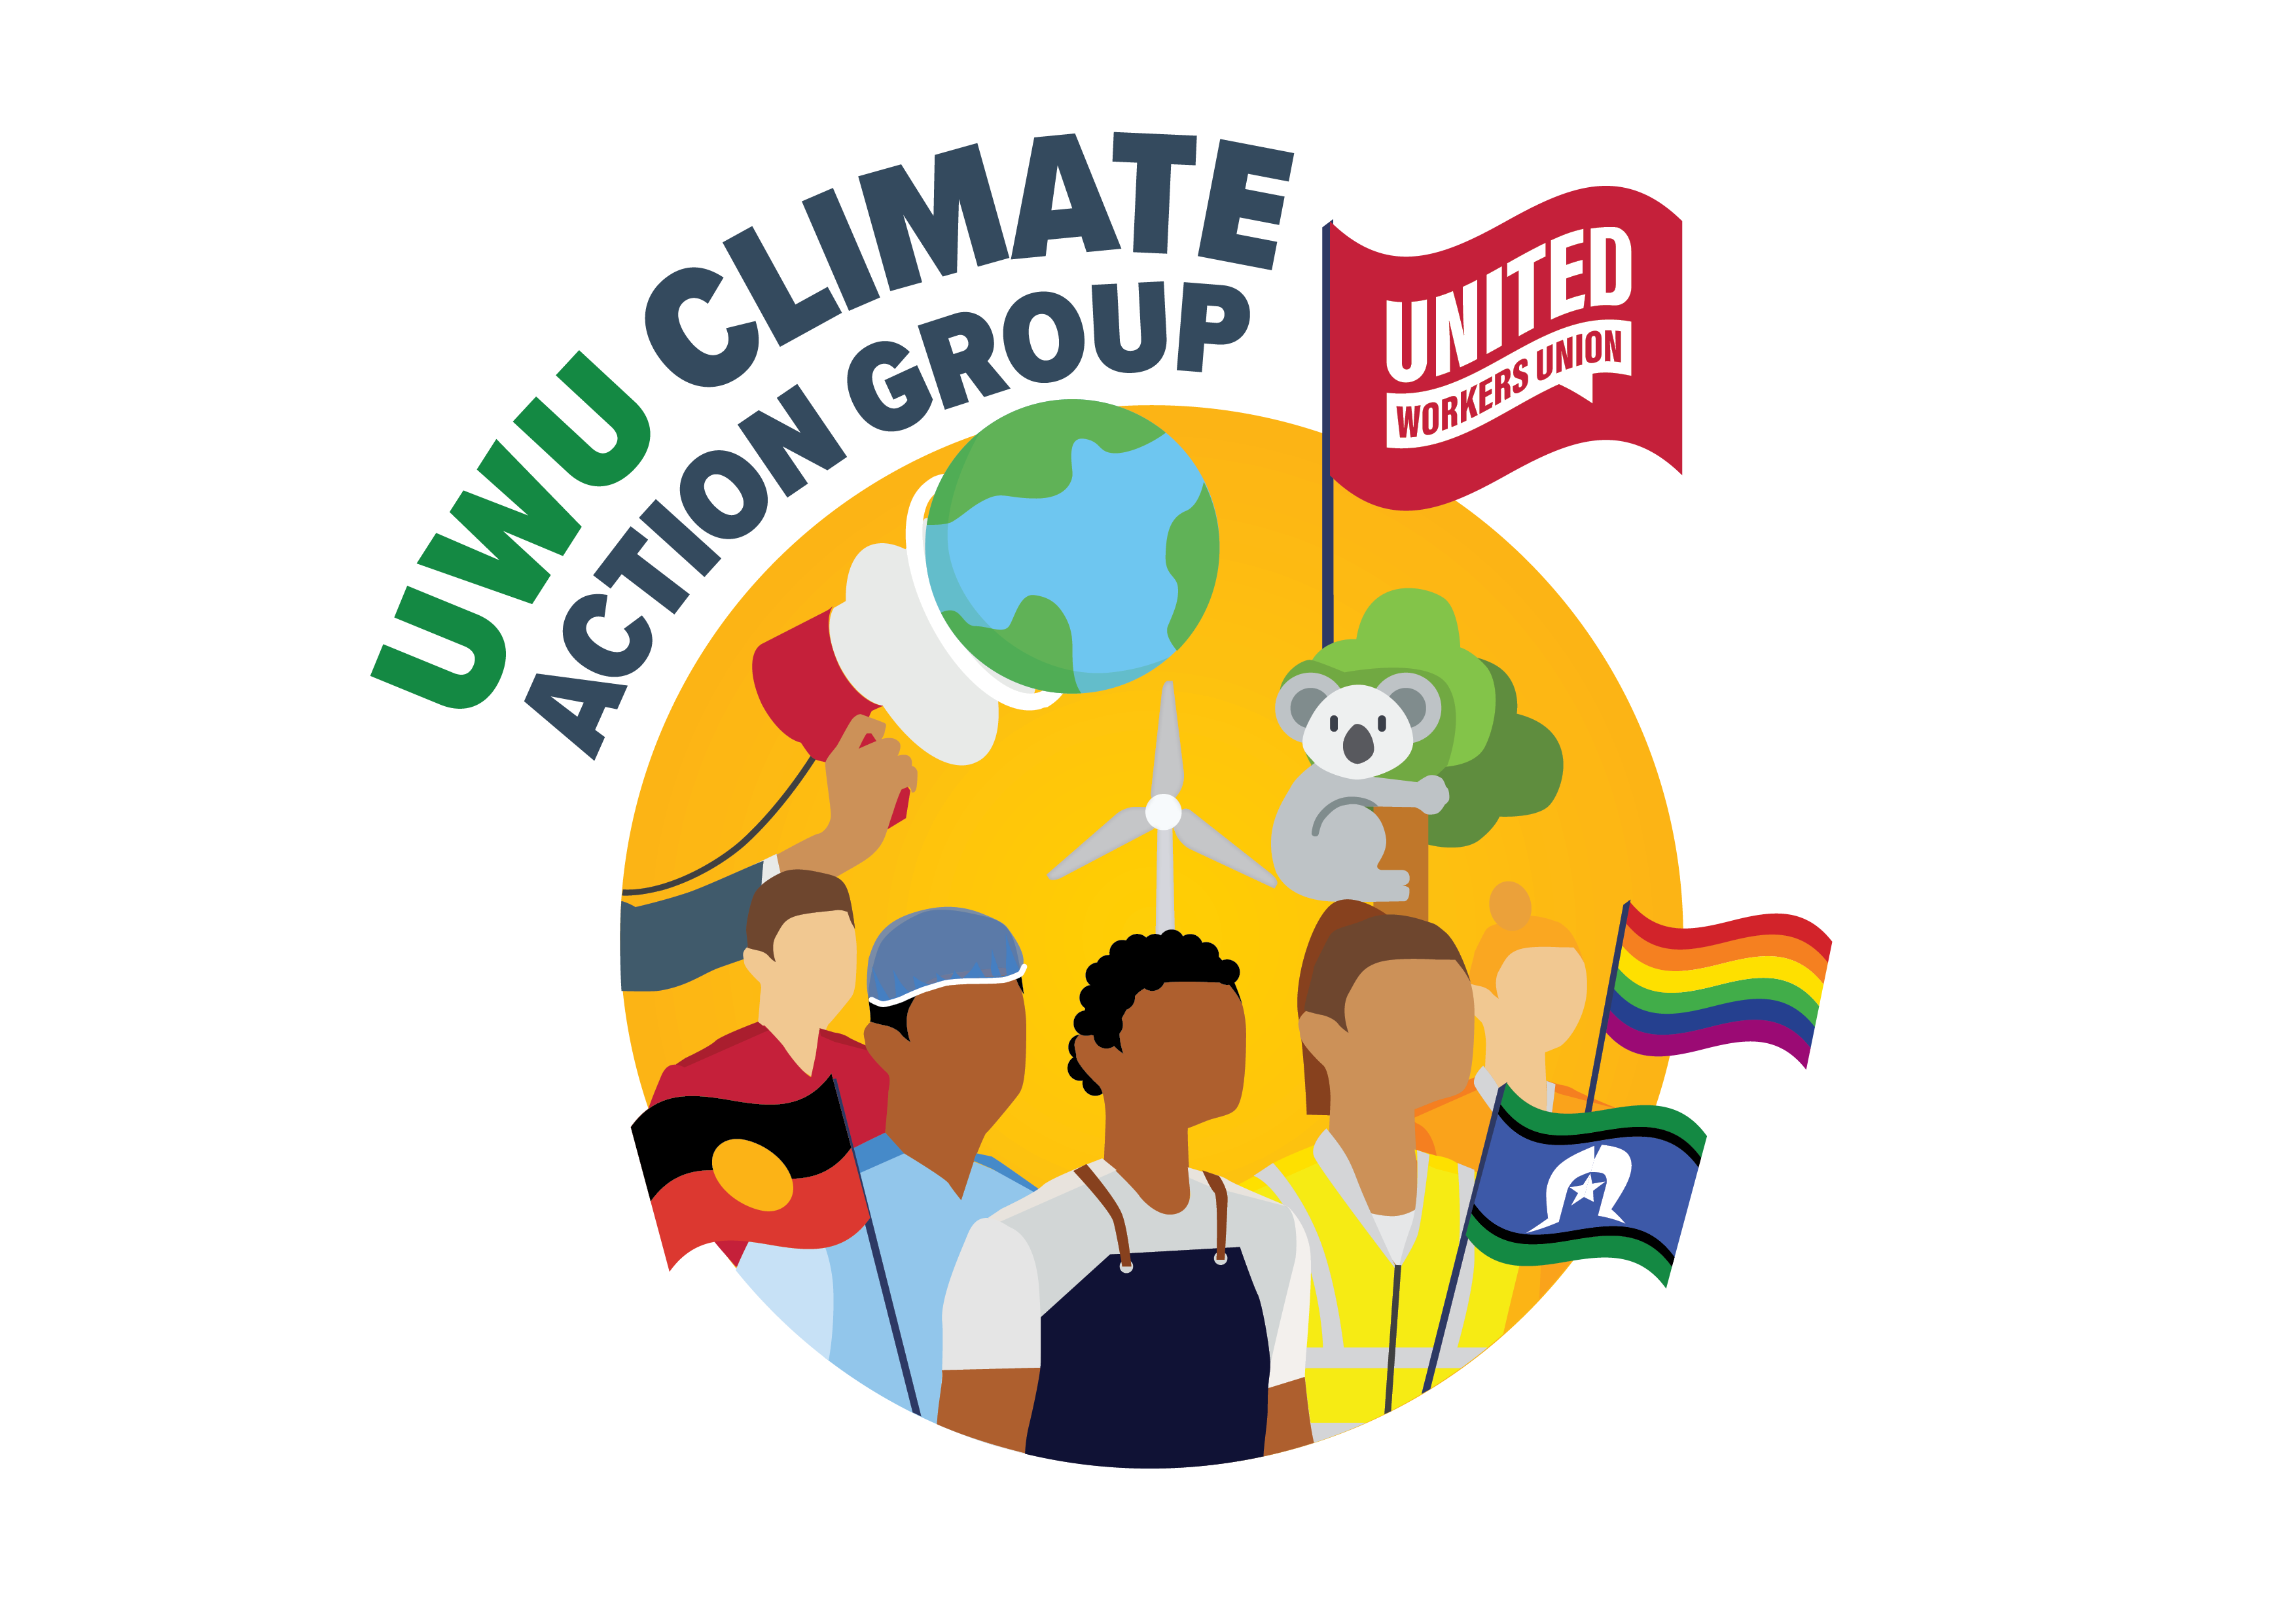 Image representing the uwu climate action group, with diverse people flags, megaphones and the planet on display.